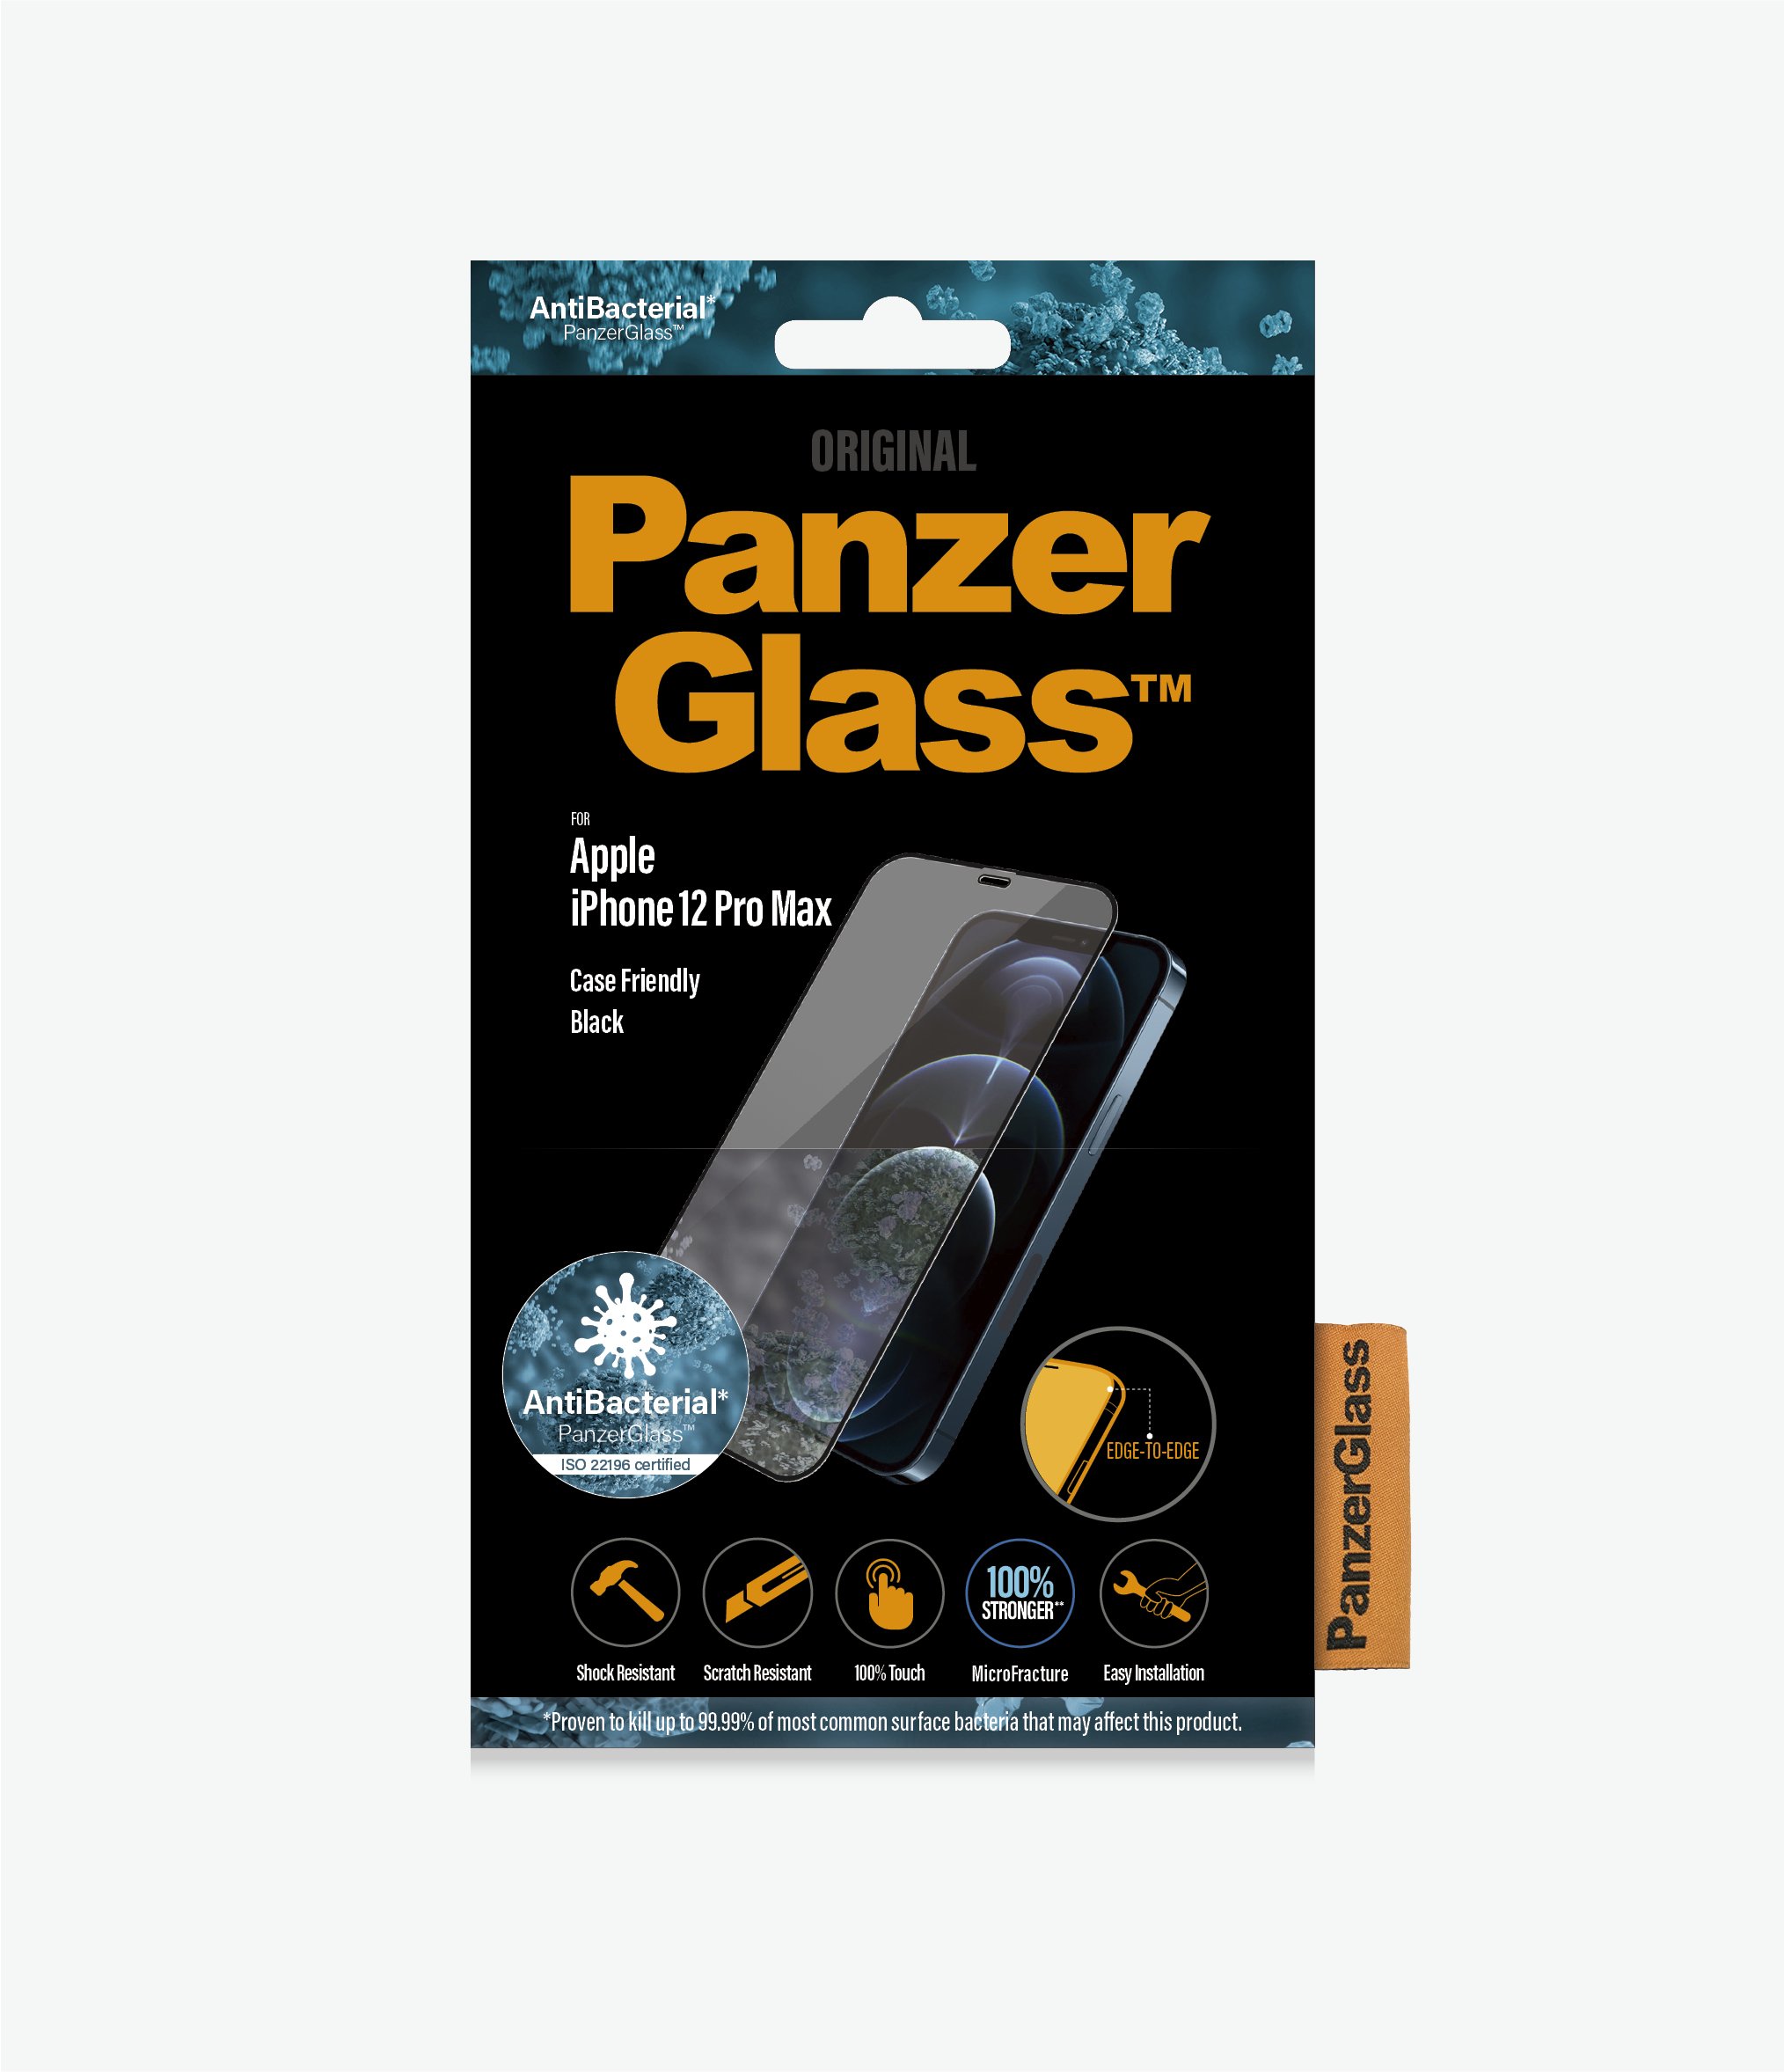 PanzerGlass™ Apple  iPhone 12 Pro Max - Black (2712) - Screen Protector, Antibacterial glass, Protects the entire screen, Crystal clear, 100% Touch